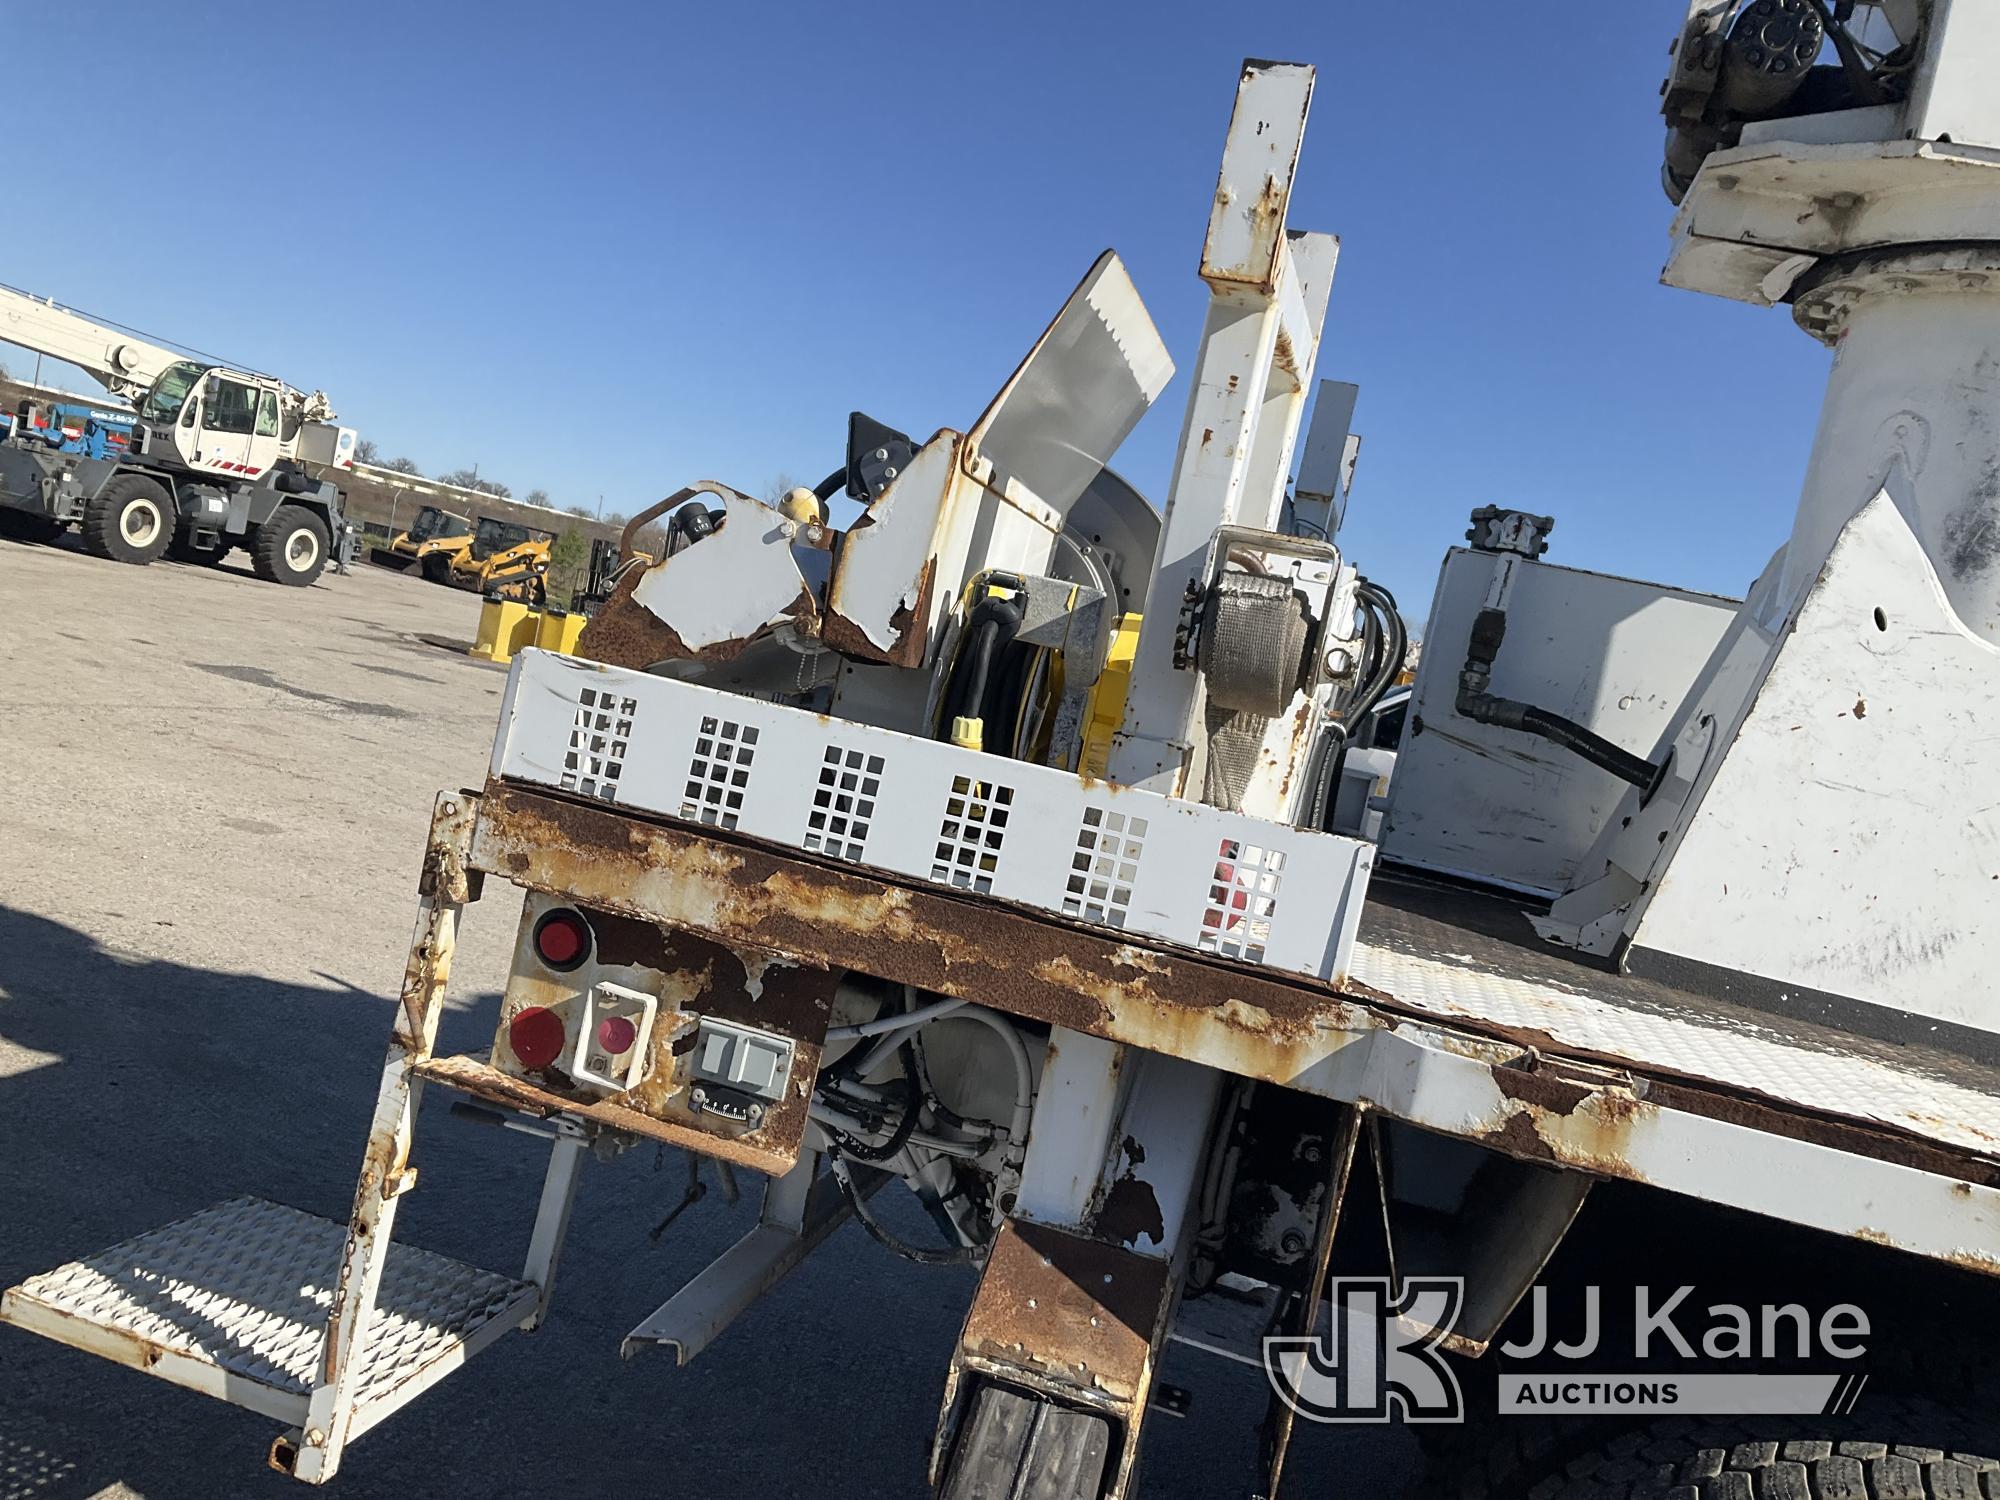 (Kansas City, MO) Altec DM45-TR, Digger Derrick rear mounted on 2013 Freightliner M2 106 T/A Flatbed